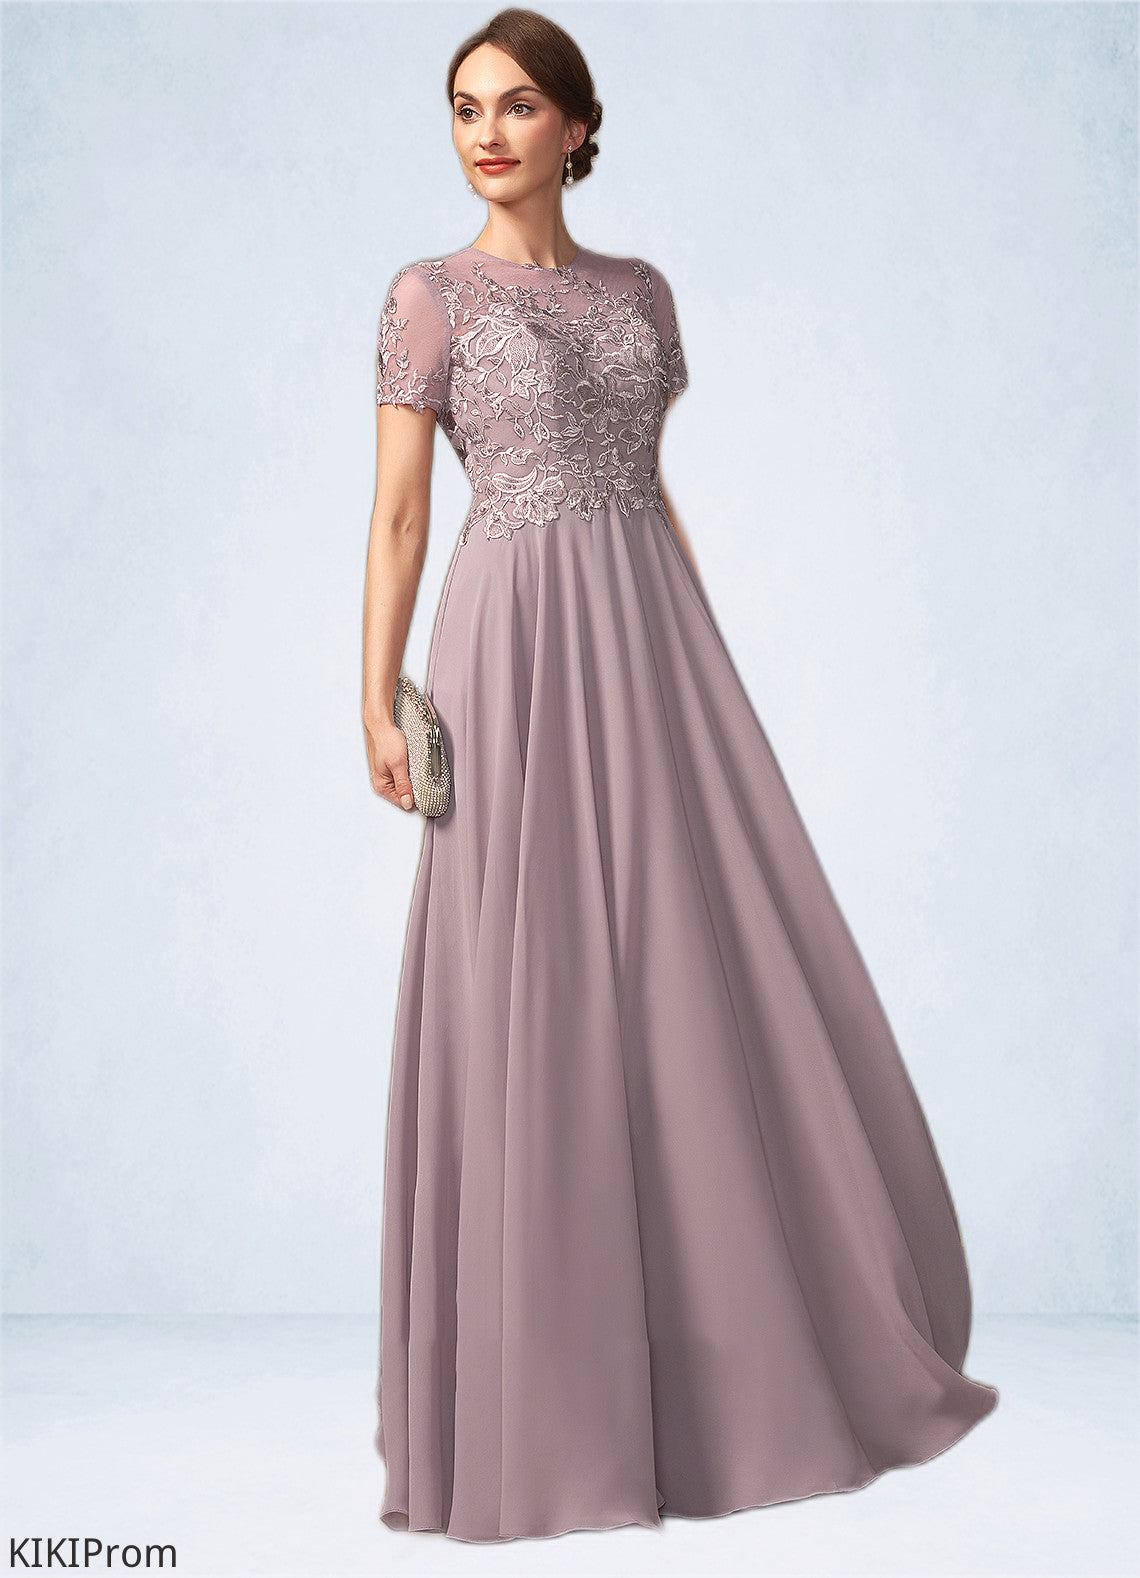 Everly A-Line Scoop Neck Floor-Length Chiffon Lace Mother of the Bride Dress With Beading Sequins DZ126P0014987